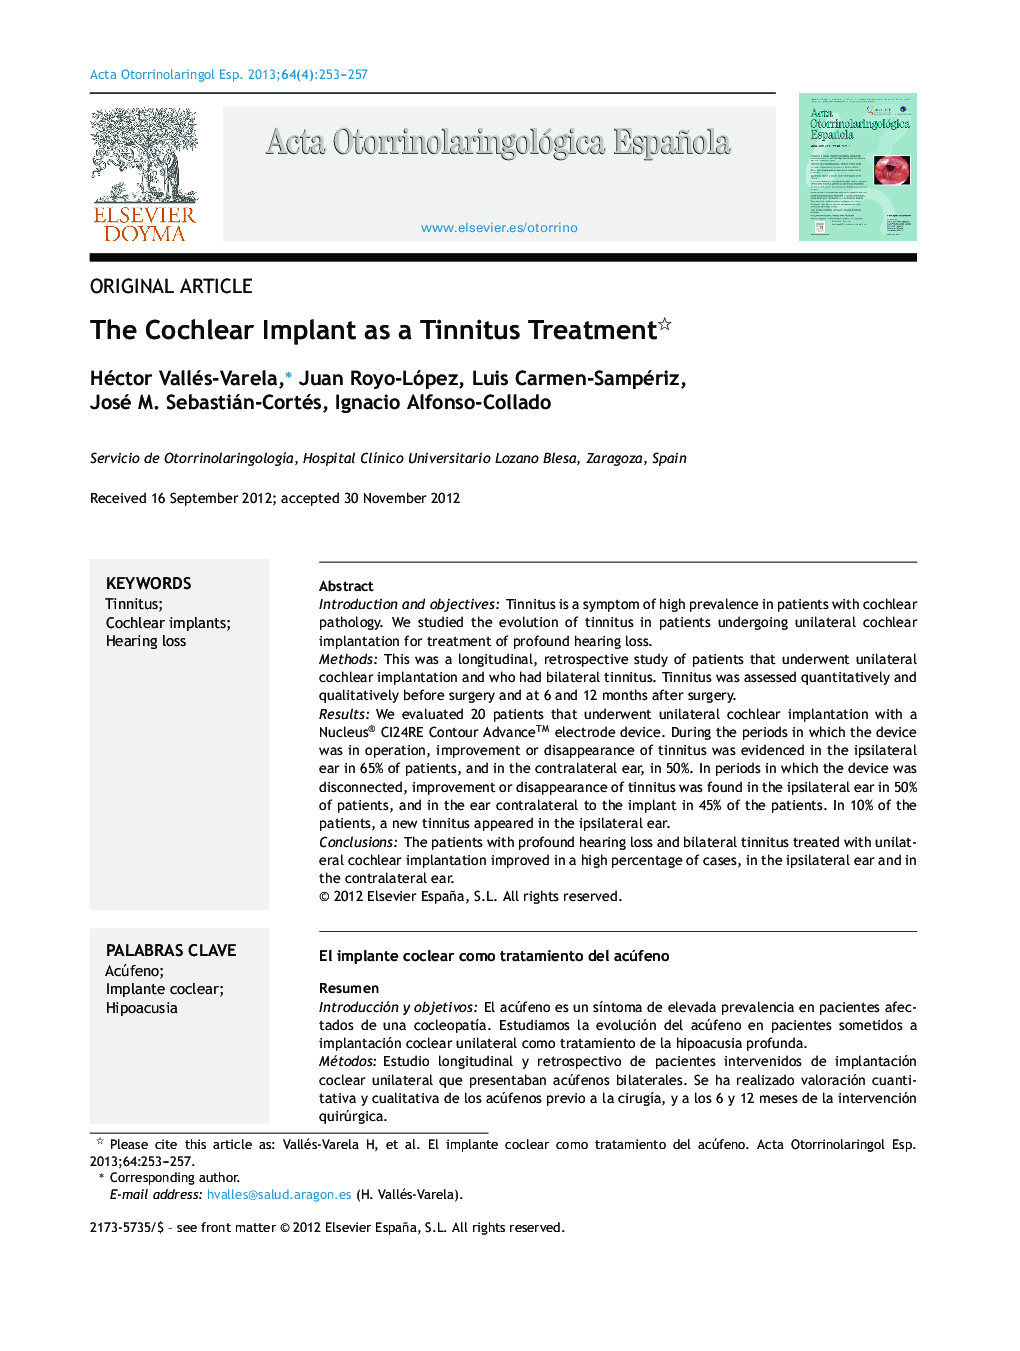 The Cochlear Implant as a Tinnitus Treatment 